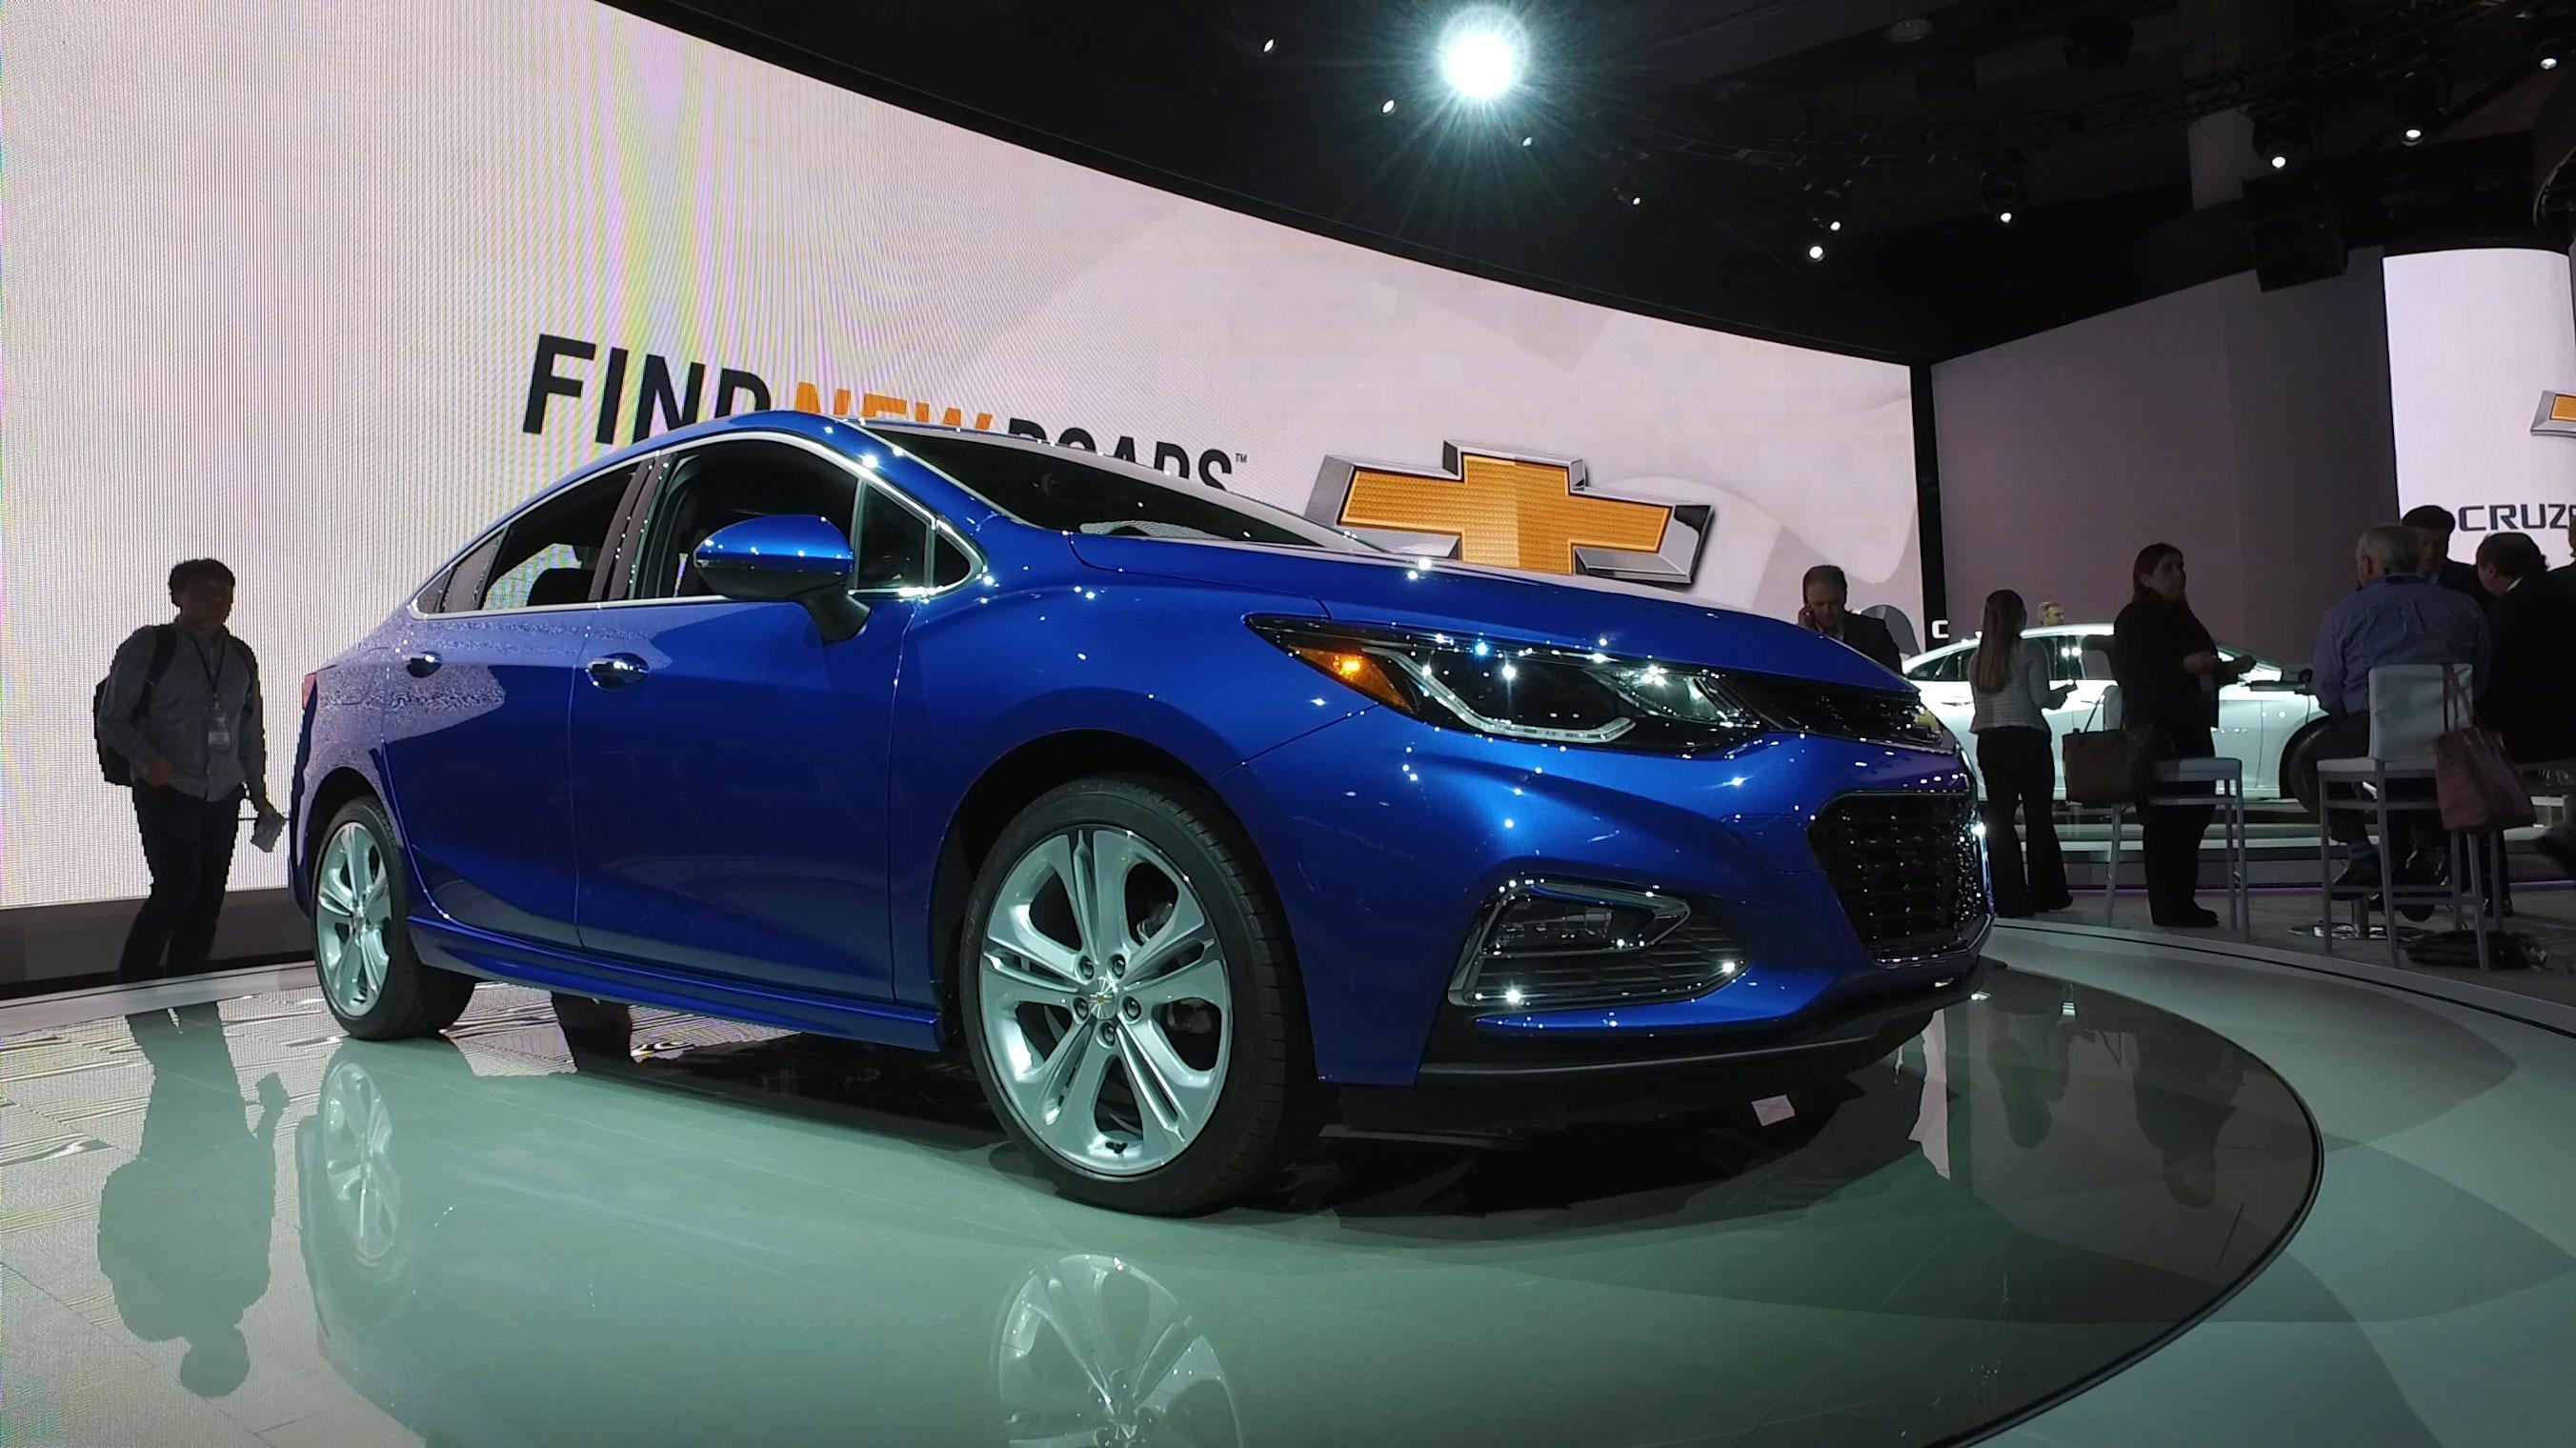 2016 Chevy Cruze Aims to Feel Bigger with Redesign